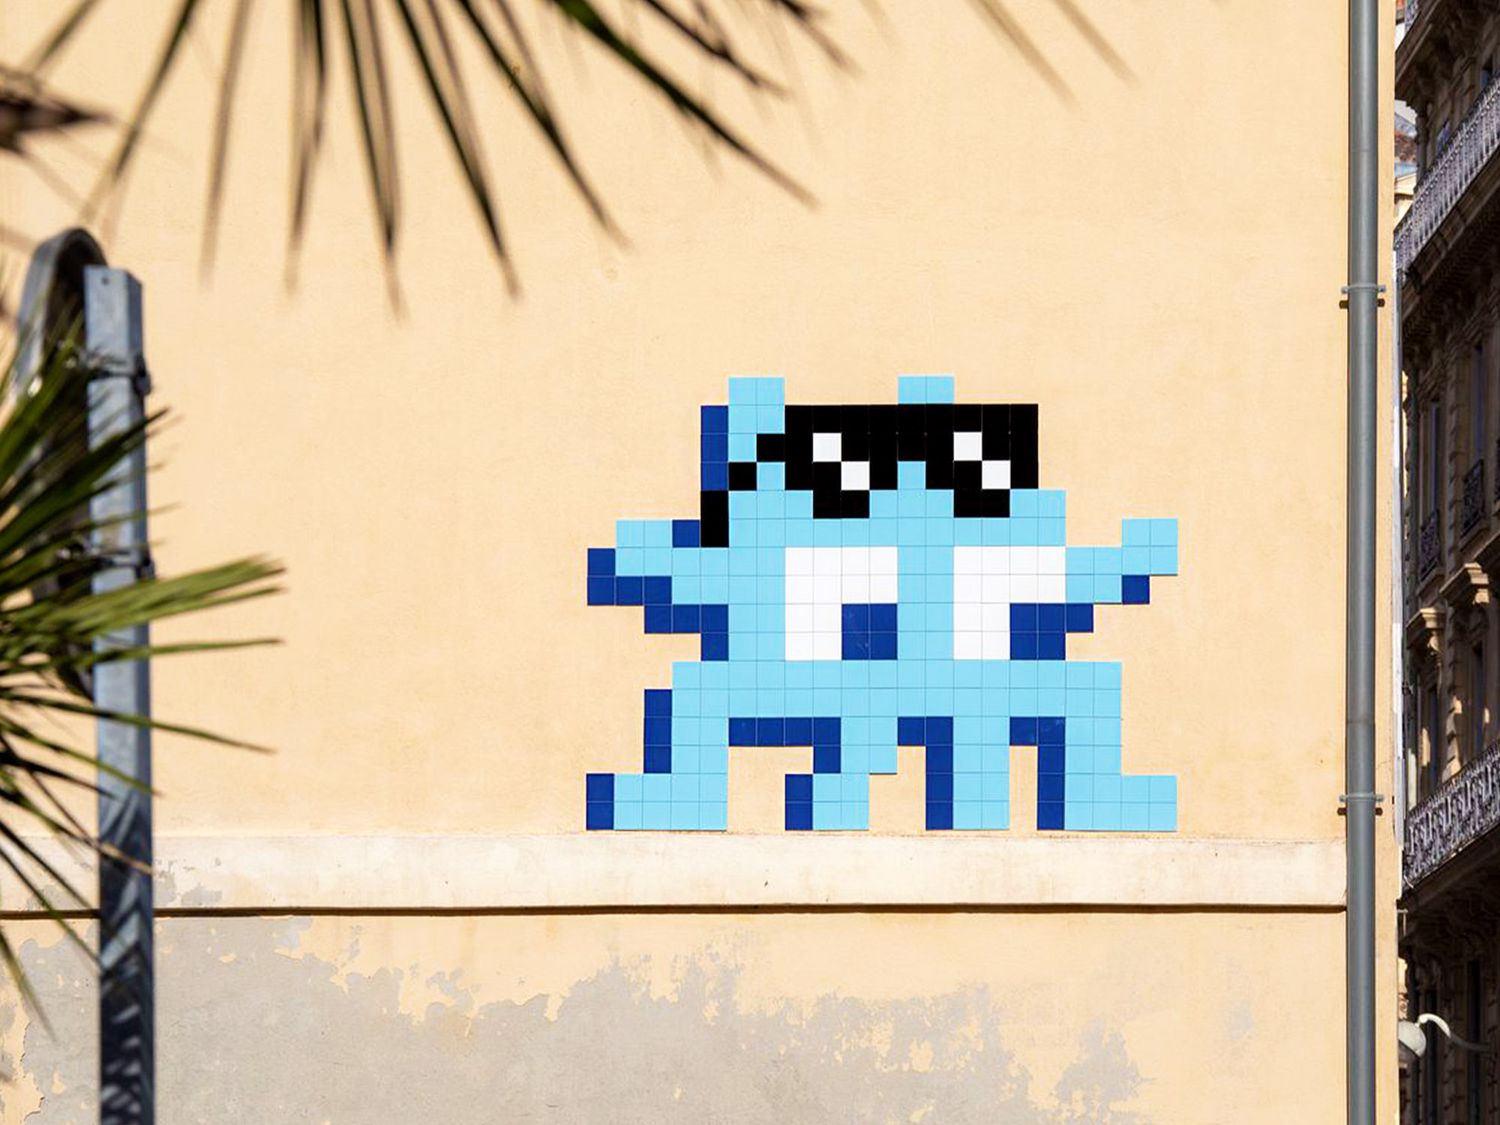 Spearhead of this artistic practice and undisputed leader, the artist Invader has been making his mark since the 1990s with his mosaics and inspiring other artists as well (©Invader).